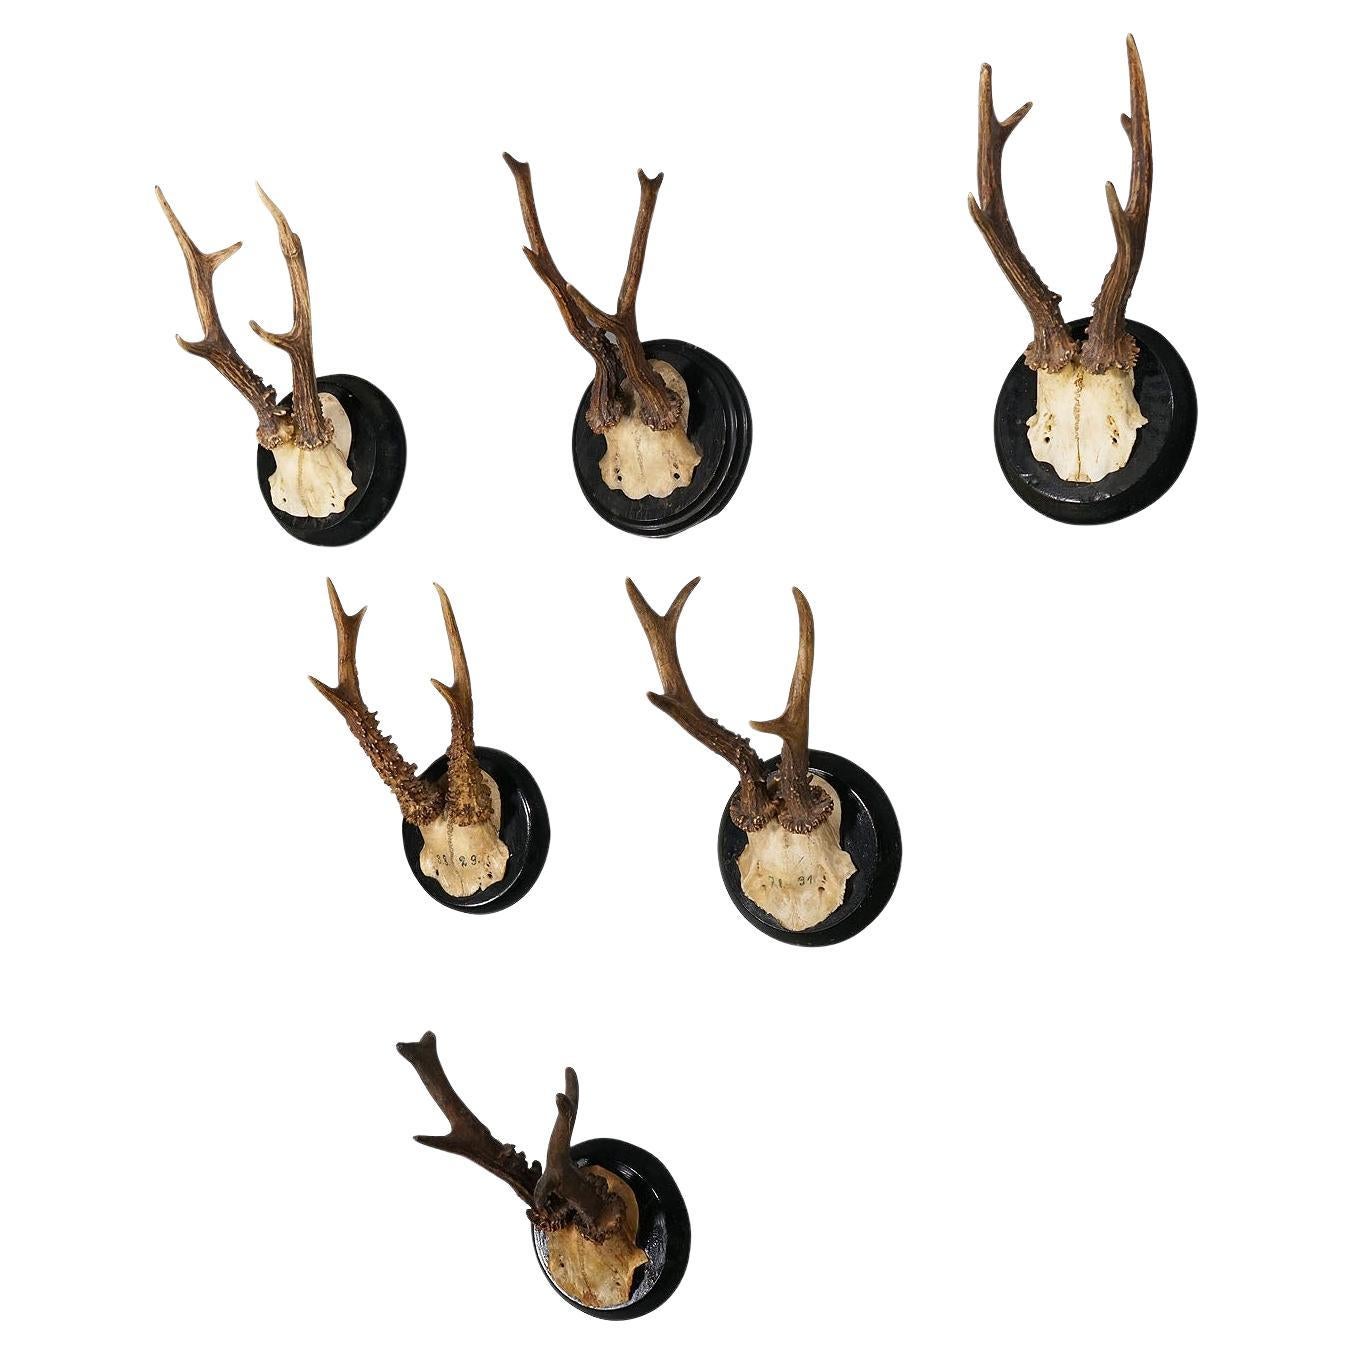 Six Antique Deer Trophies on Wooden Plaques, Germany, ca. 1900